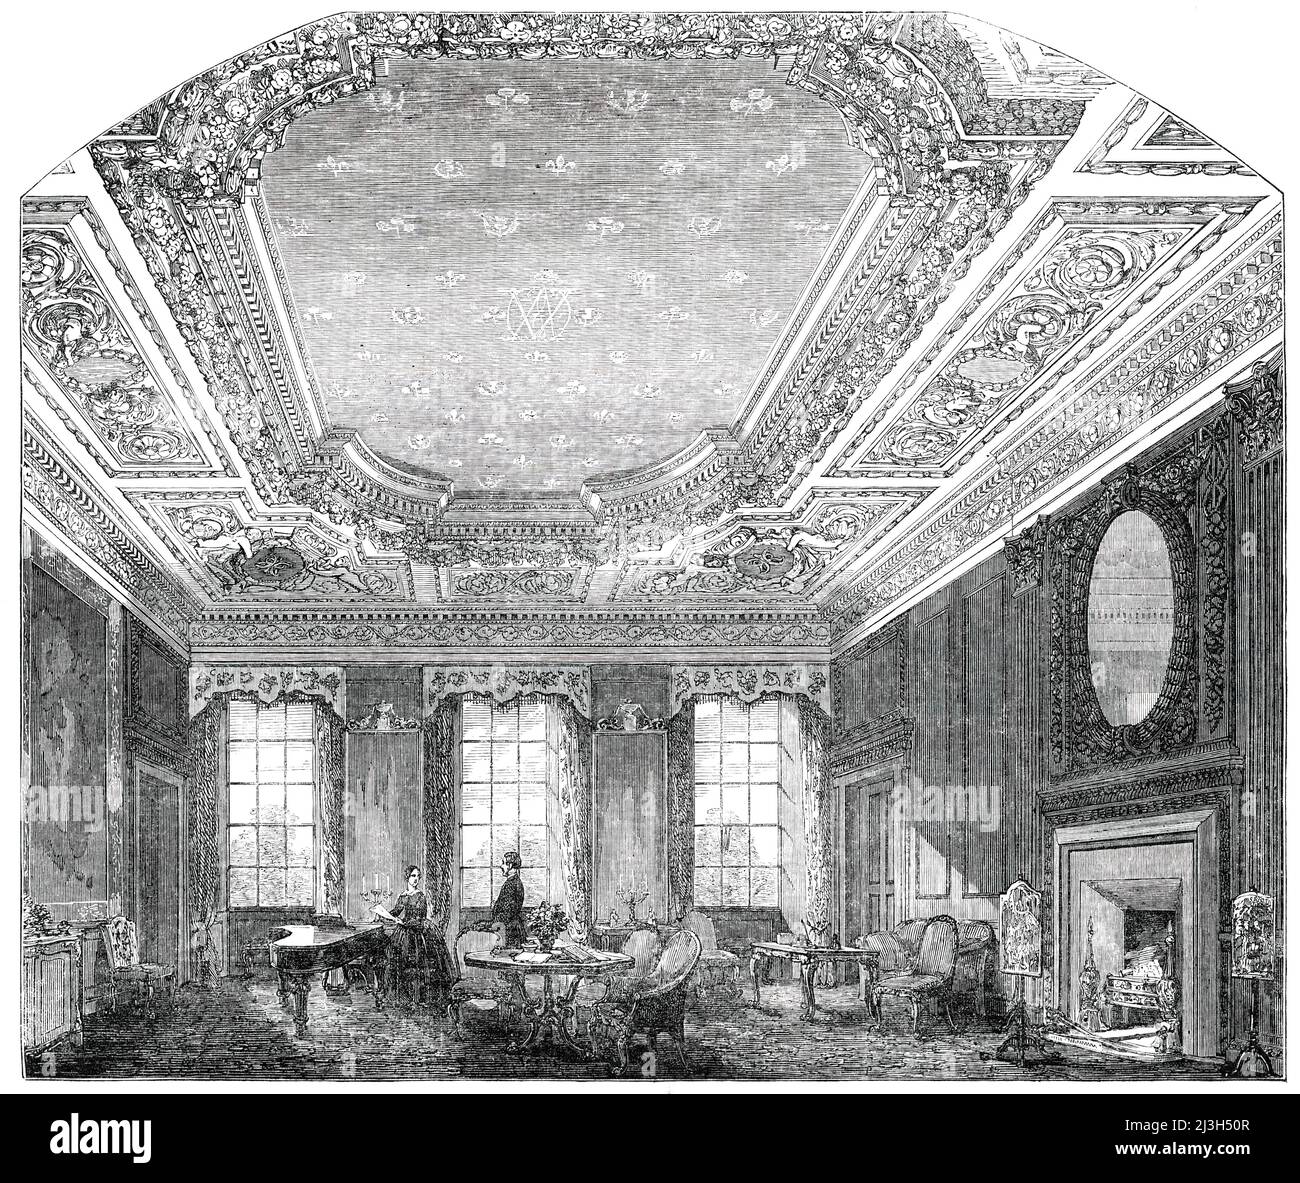 Her Majesty's Apartment at Holyrood, 1850.  Interior of the royal Palace of Holyrood, Edinburgh, Scotland. 'The sitting-room newly fitted for Queen Victoria, is a very handsome apartment, the ceiling being particularly fine. The walls...are wainscoted with dark oak, which, having very recently been cleansed from the obnoxious paint of the last century, imparts a rich appearance to the room. The ceiling is deeply coffered and paneled, and the coffering excessively enriched with pendant festoons of flowers, modelled with wonderful spirit; the ceiling within being painted a negative greenish tint Stock Photo